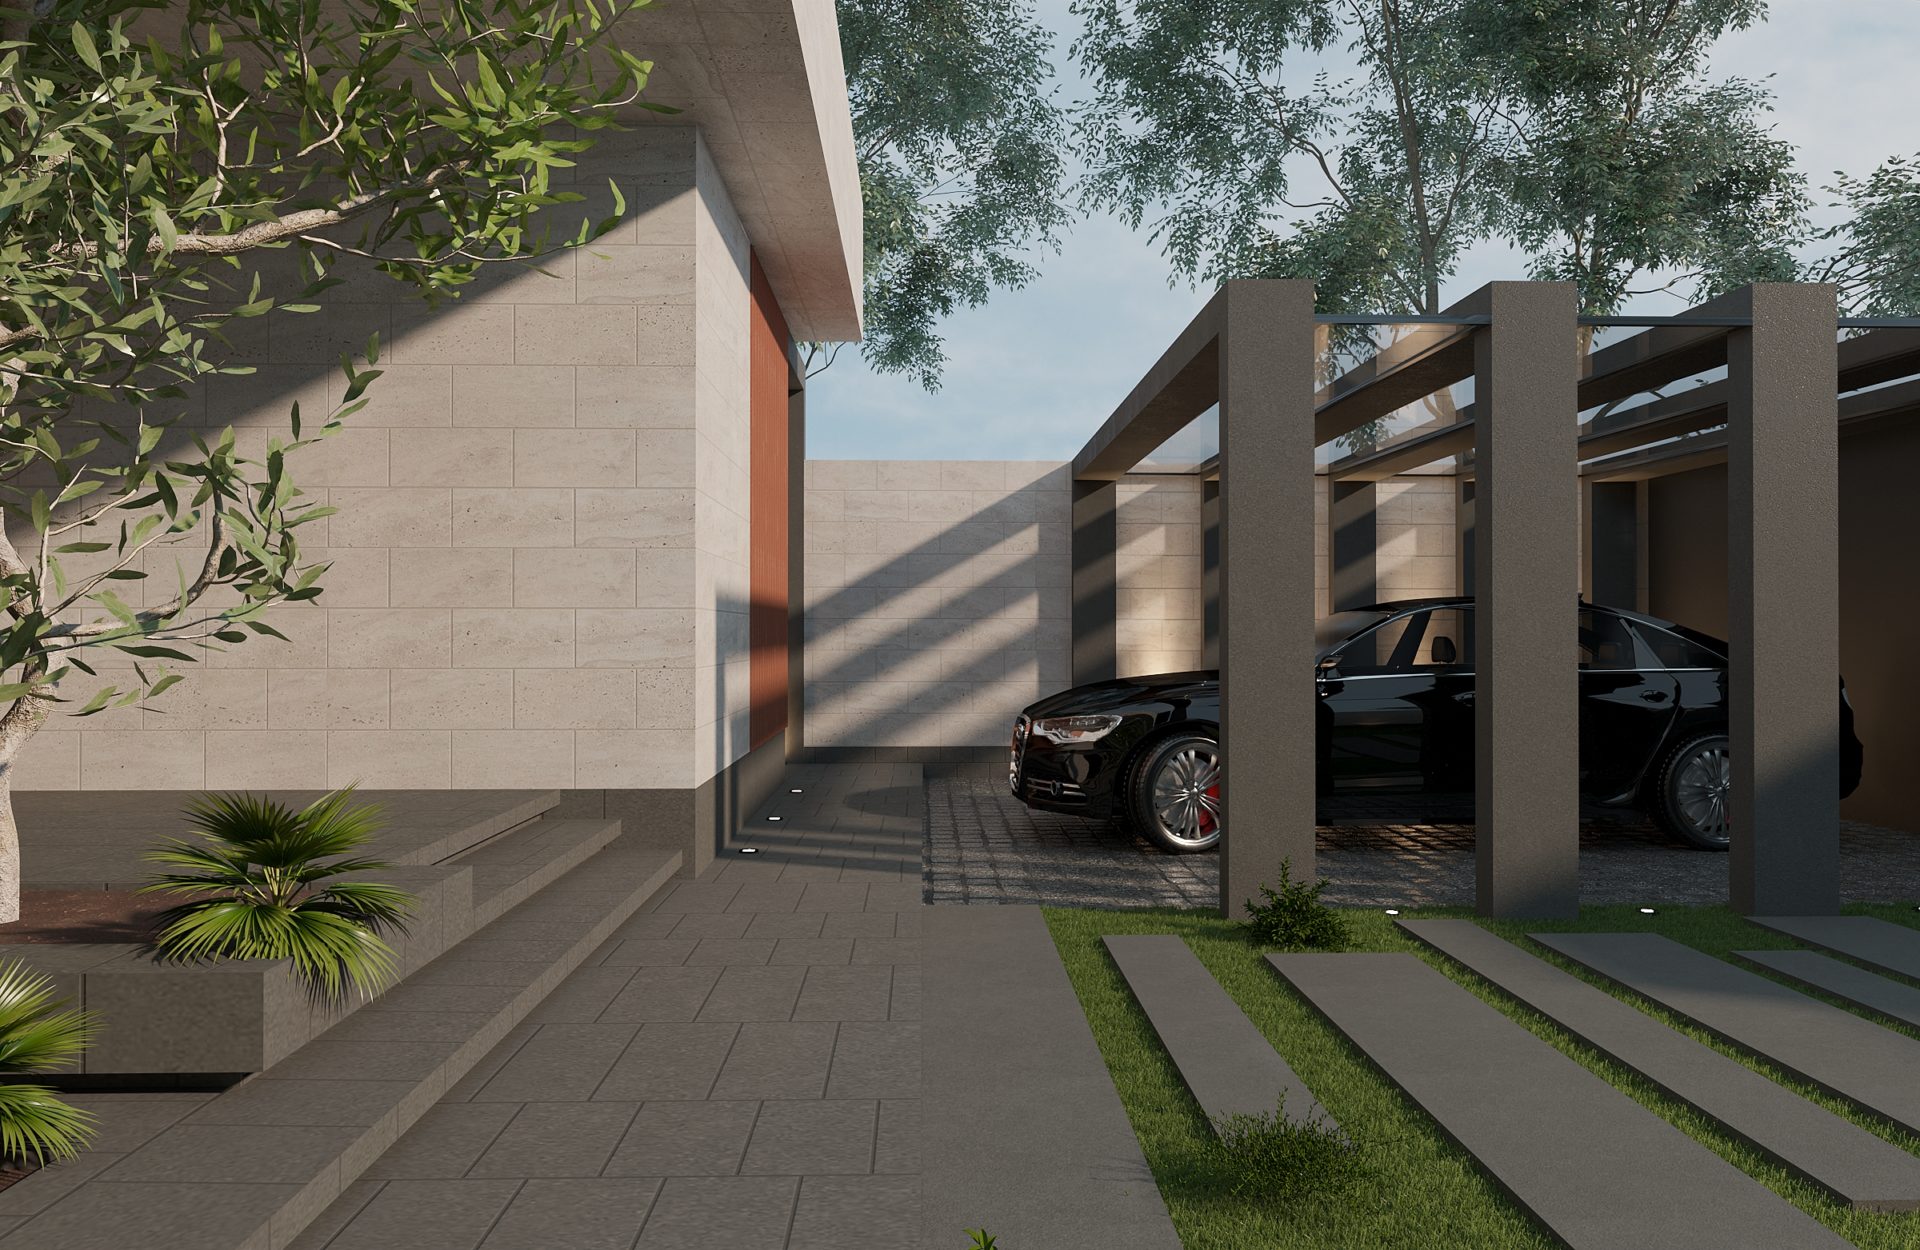 3D view of covered parking spaces for 2 cars for the residents of the mansion